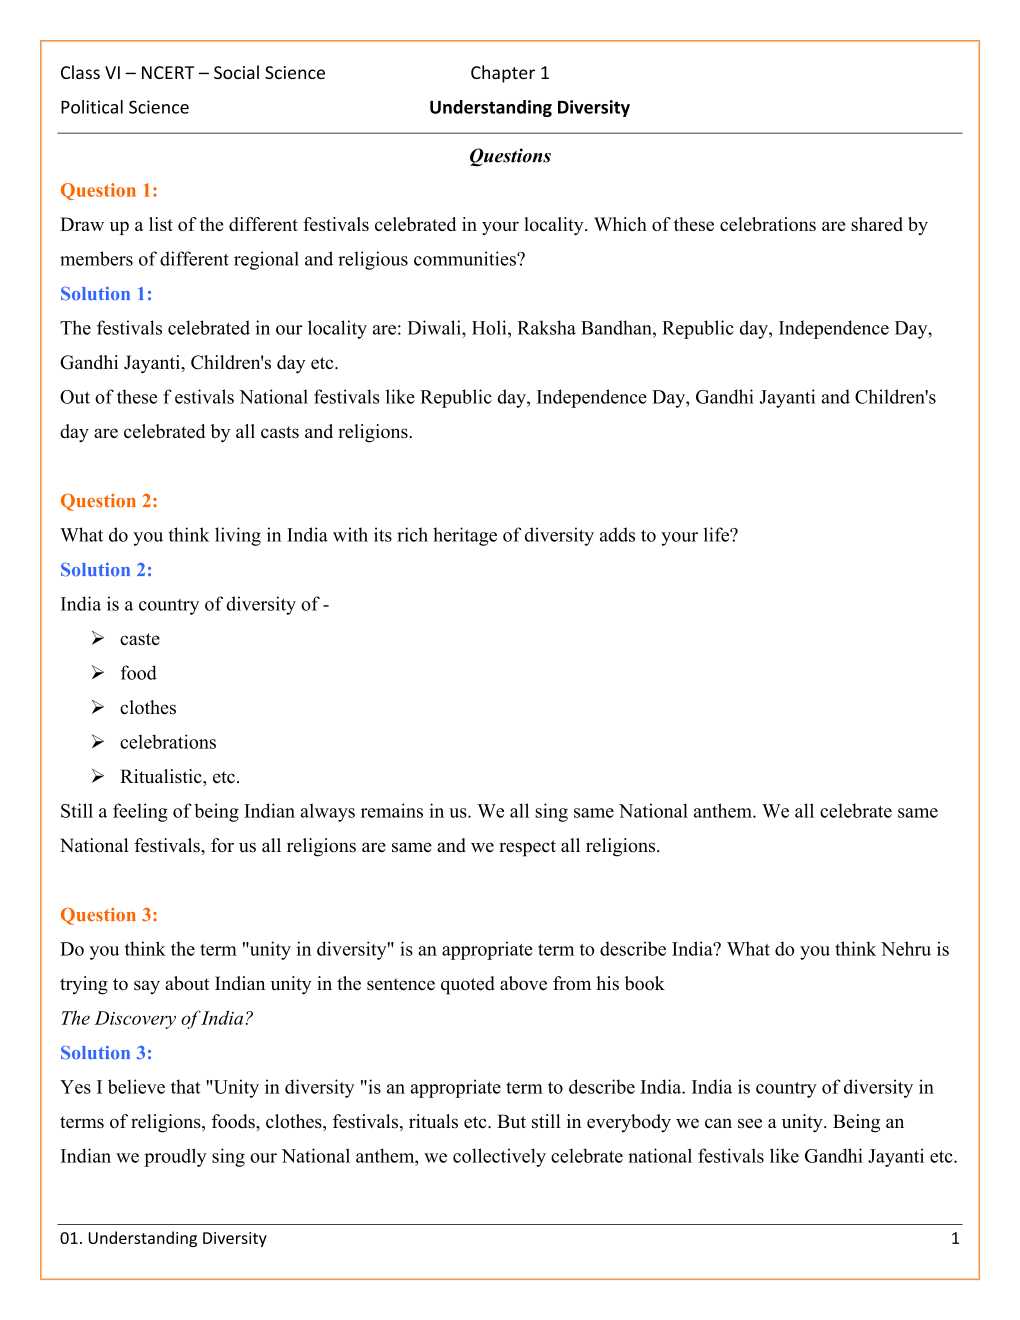 NCERT Solutions For Class 6 Social Science - Social and Political Life Chapter 1